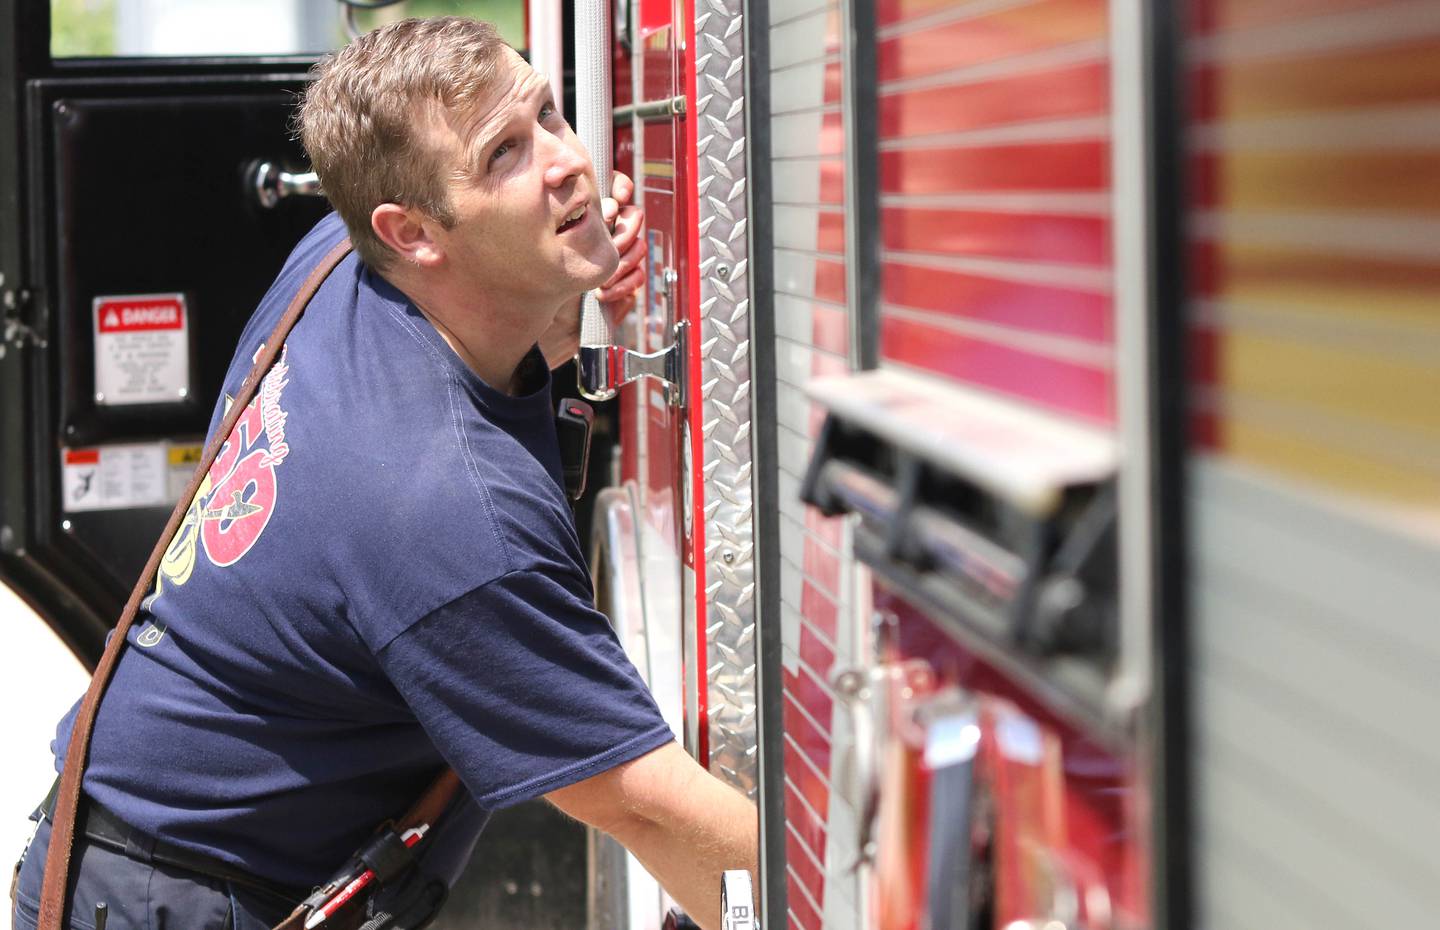 Shaw Local file photo - Travis Karr, firefighter/paramedic with the DeKalb Fire Department, gets one of the trucks ready to put back in the bay on May 21, 2021 at Fire Station No. 3 in DeKalb.